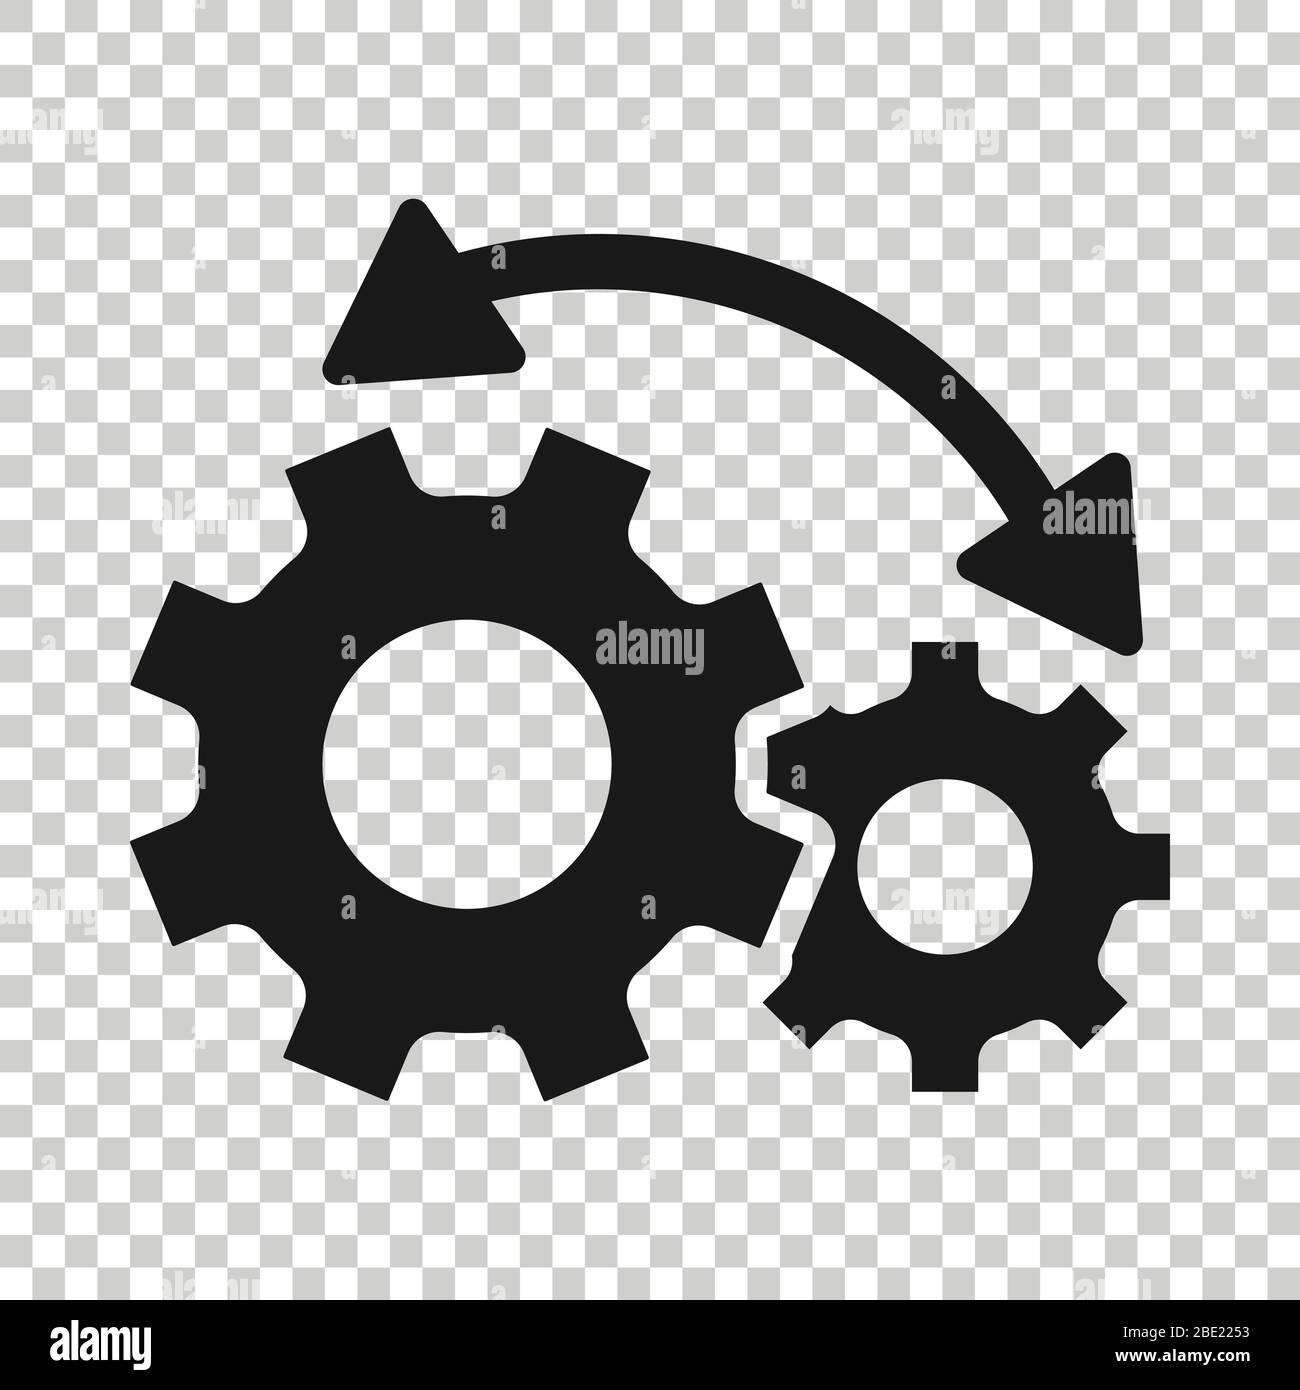 Workflow icon in flat style. Gear effective vector illustration on white isolated background. Process organization business concept. Stock Vector